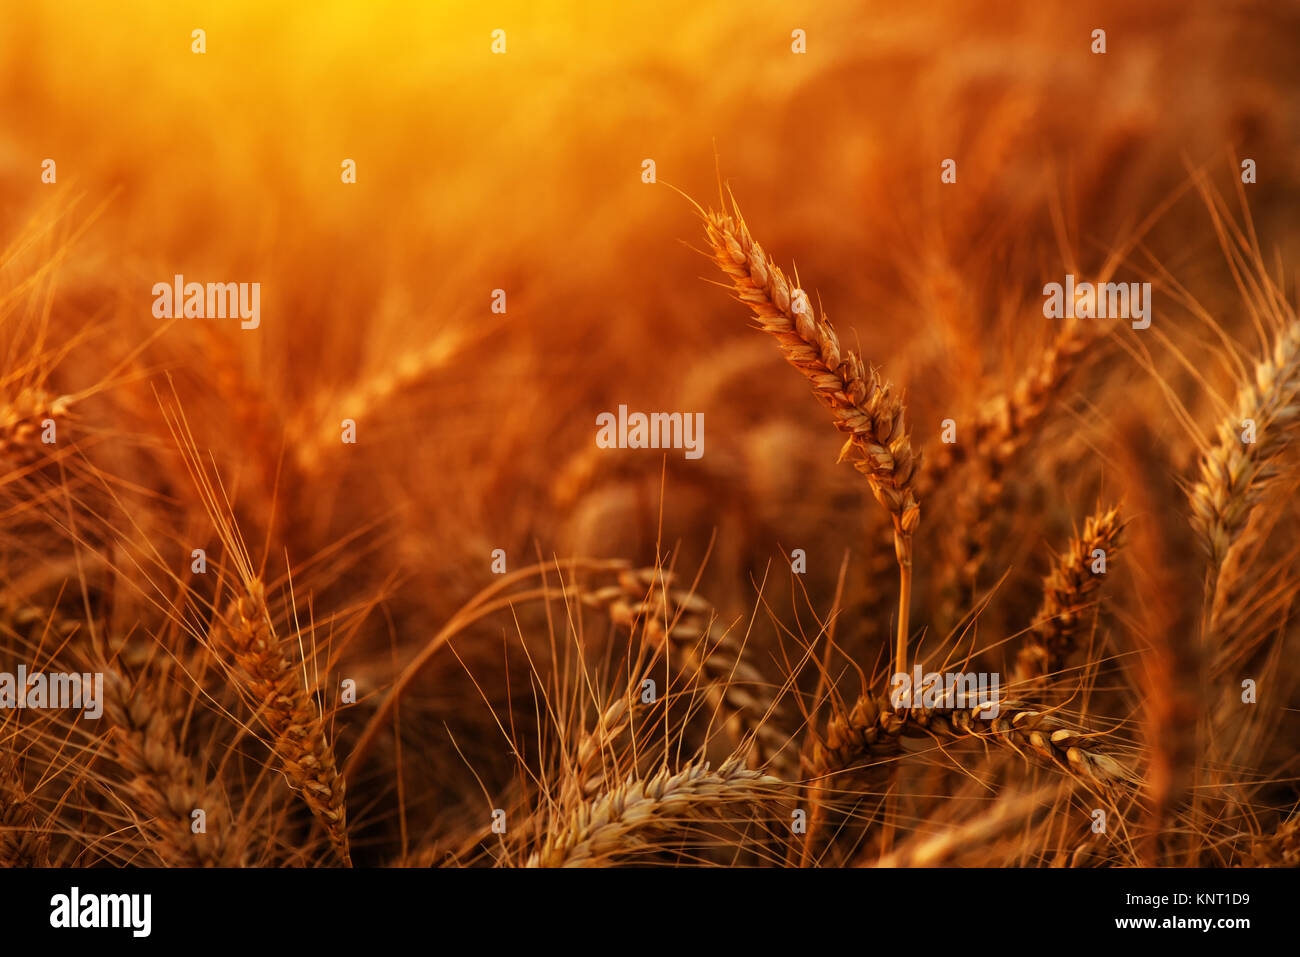 Golden ripe wheat ears in cultivated agricultural crops field, cereal plant is ready for harvest Stock Photo